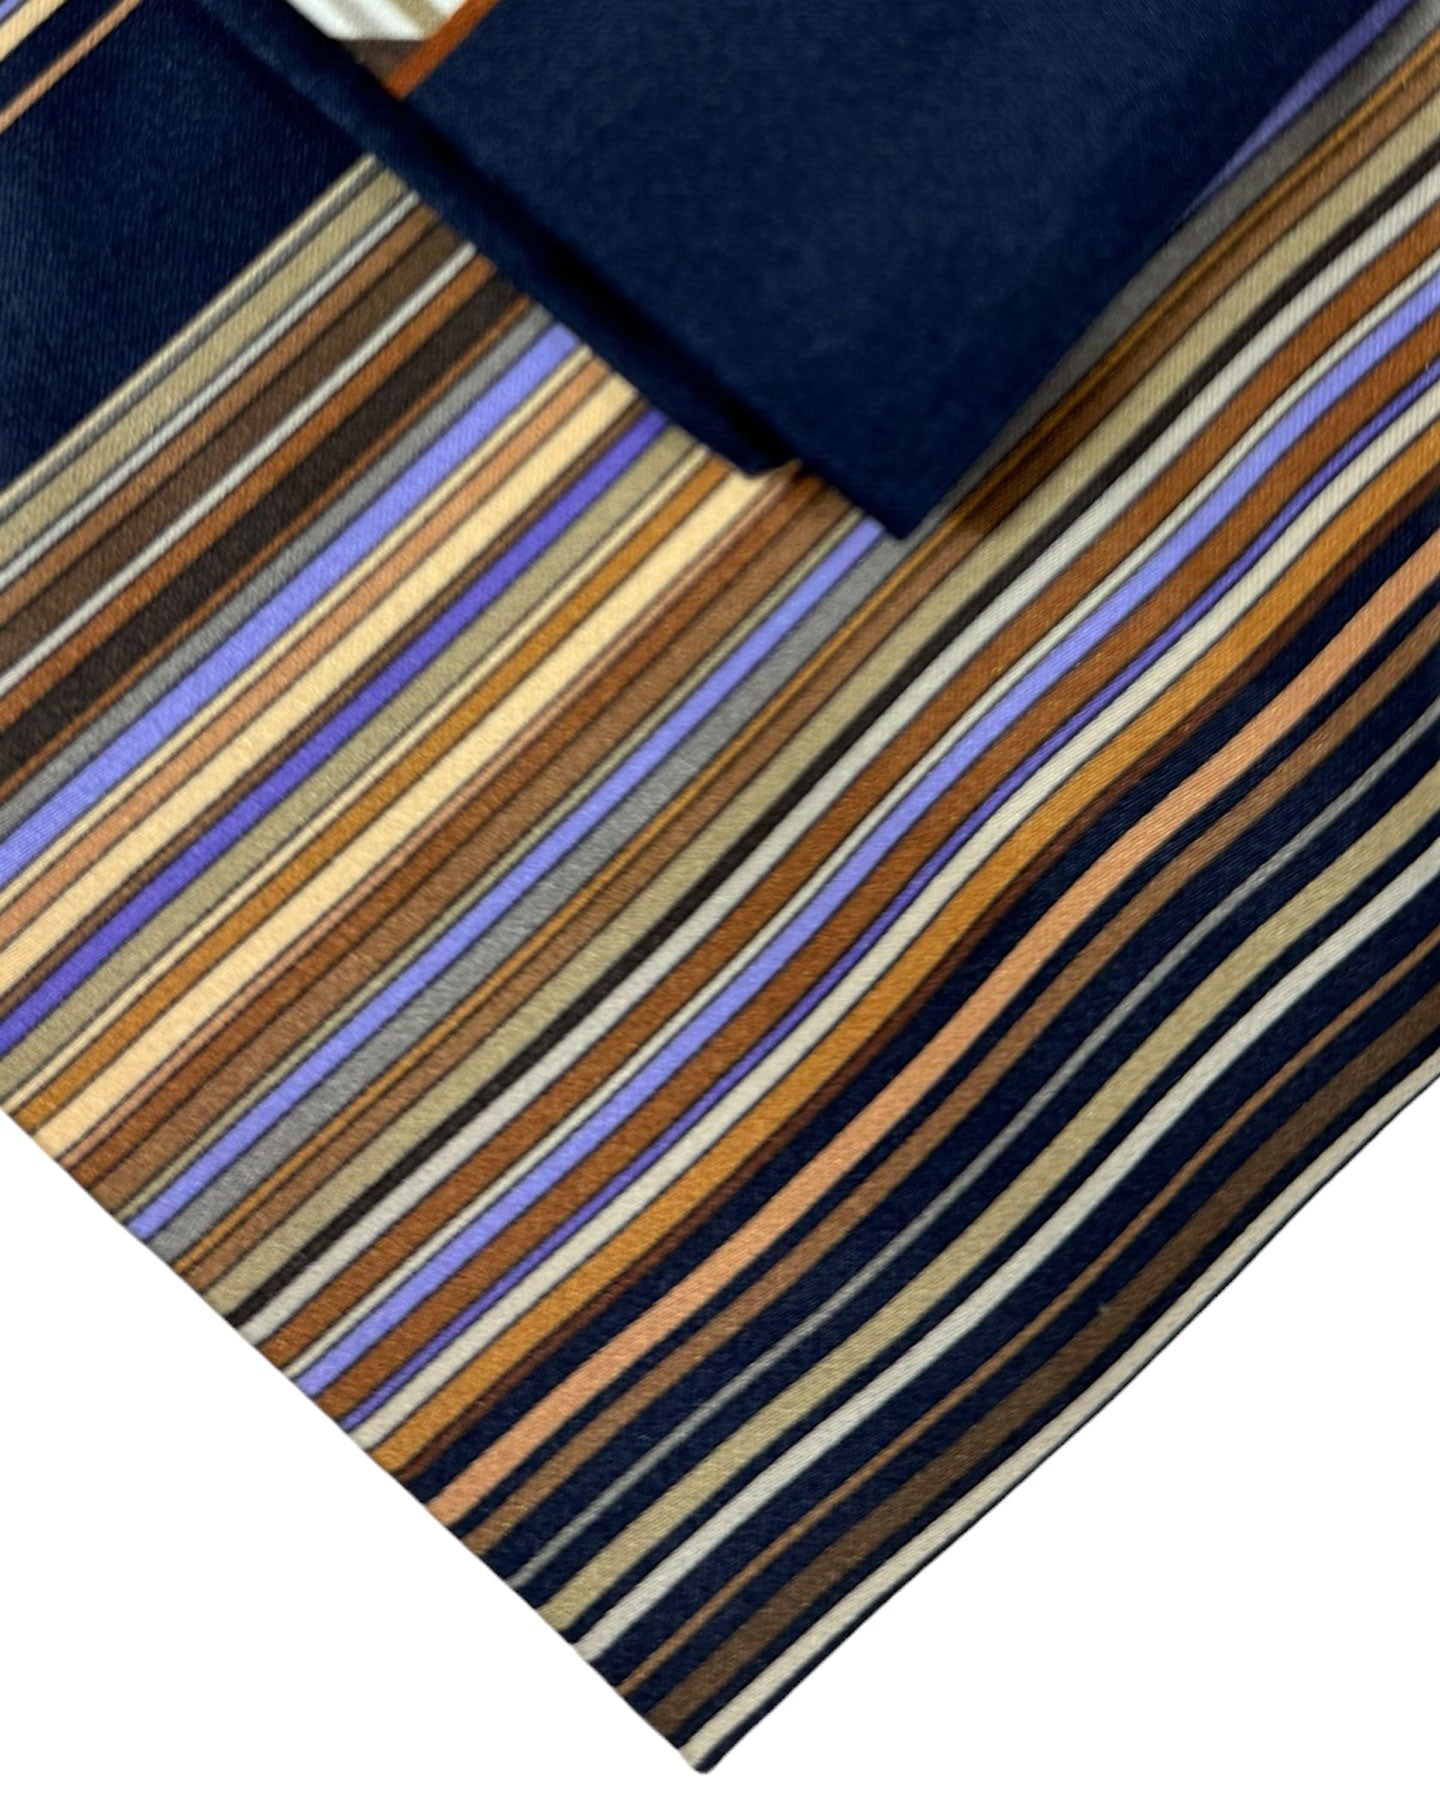 Zilli Tie & Matching Pocket Square Set Brown Lilac Stripes